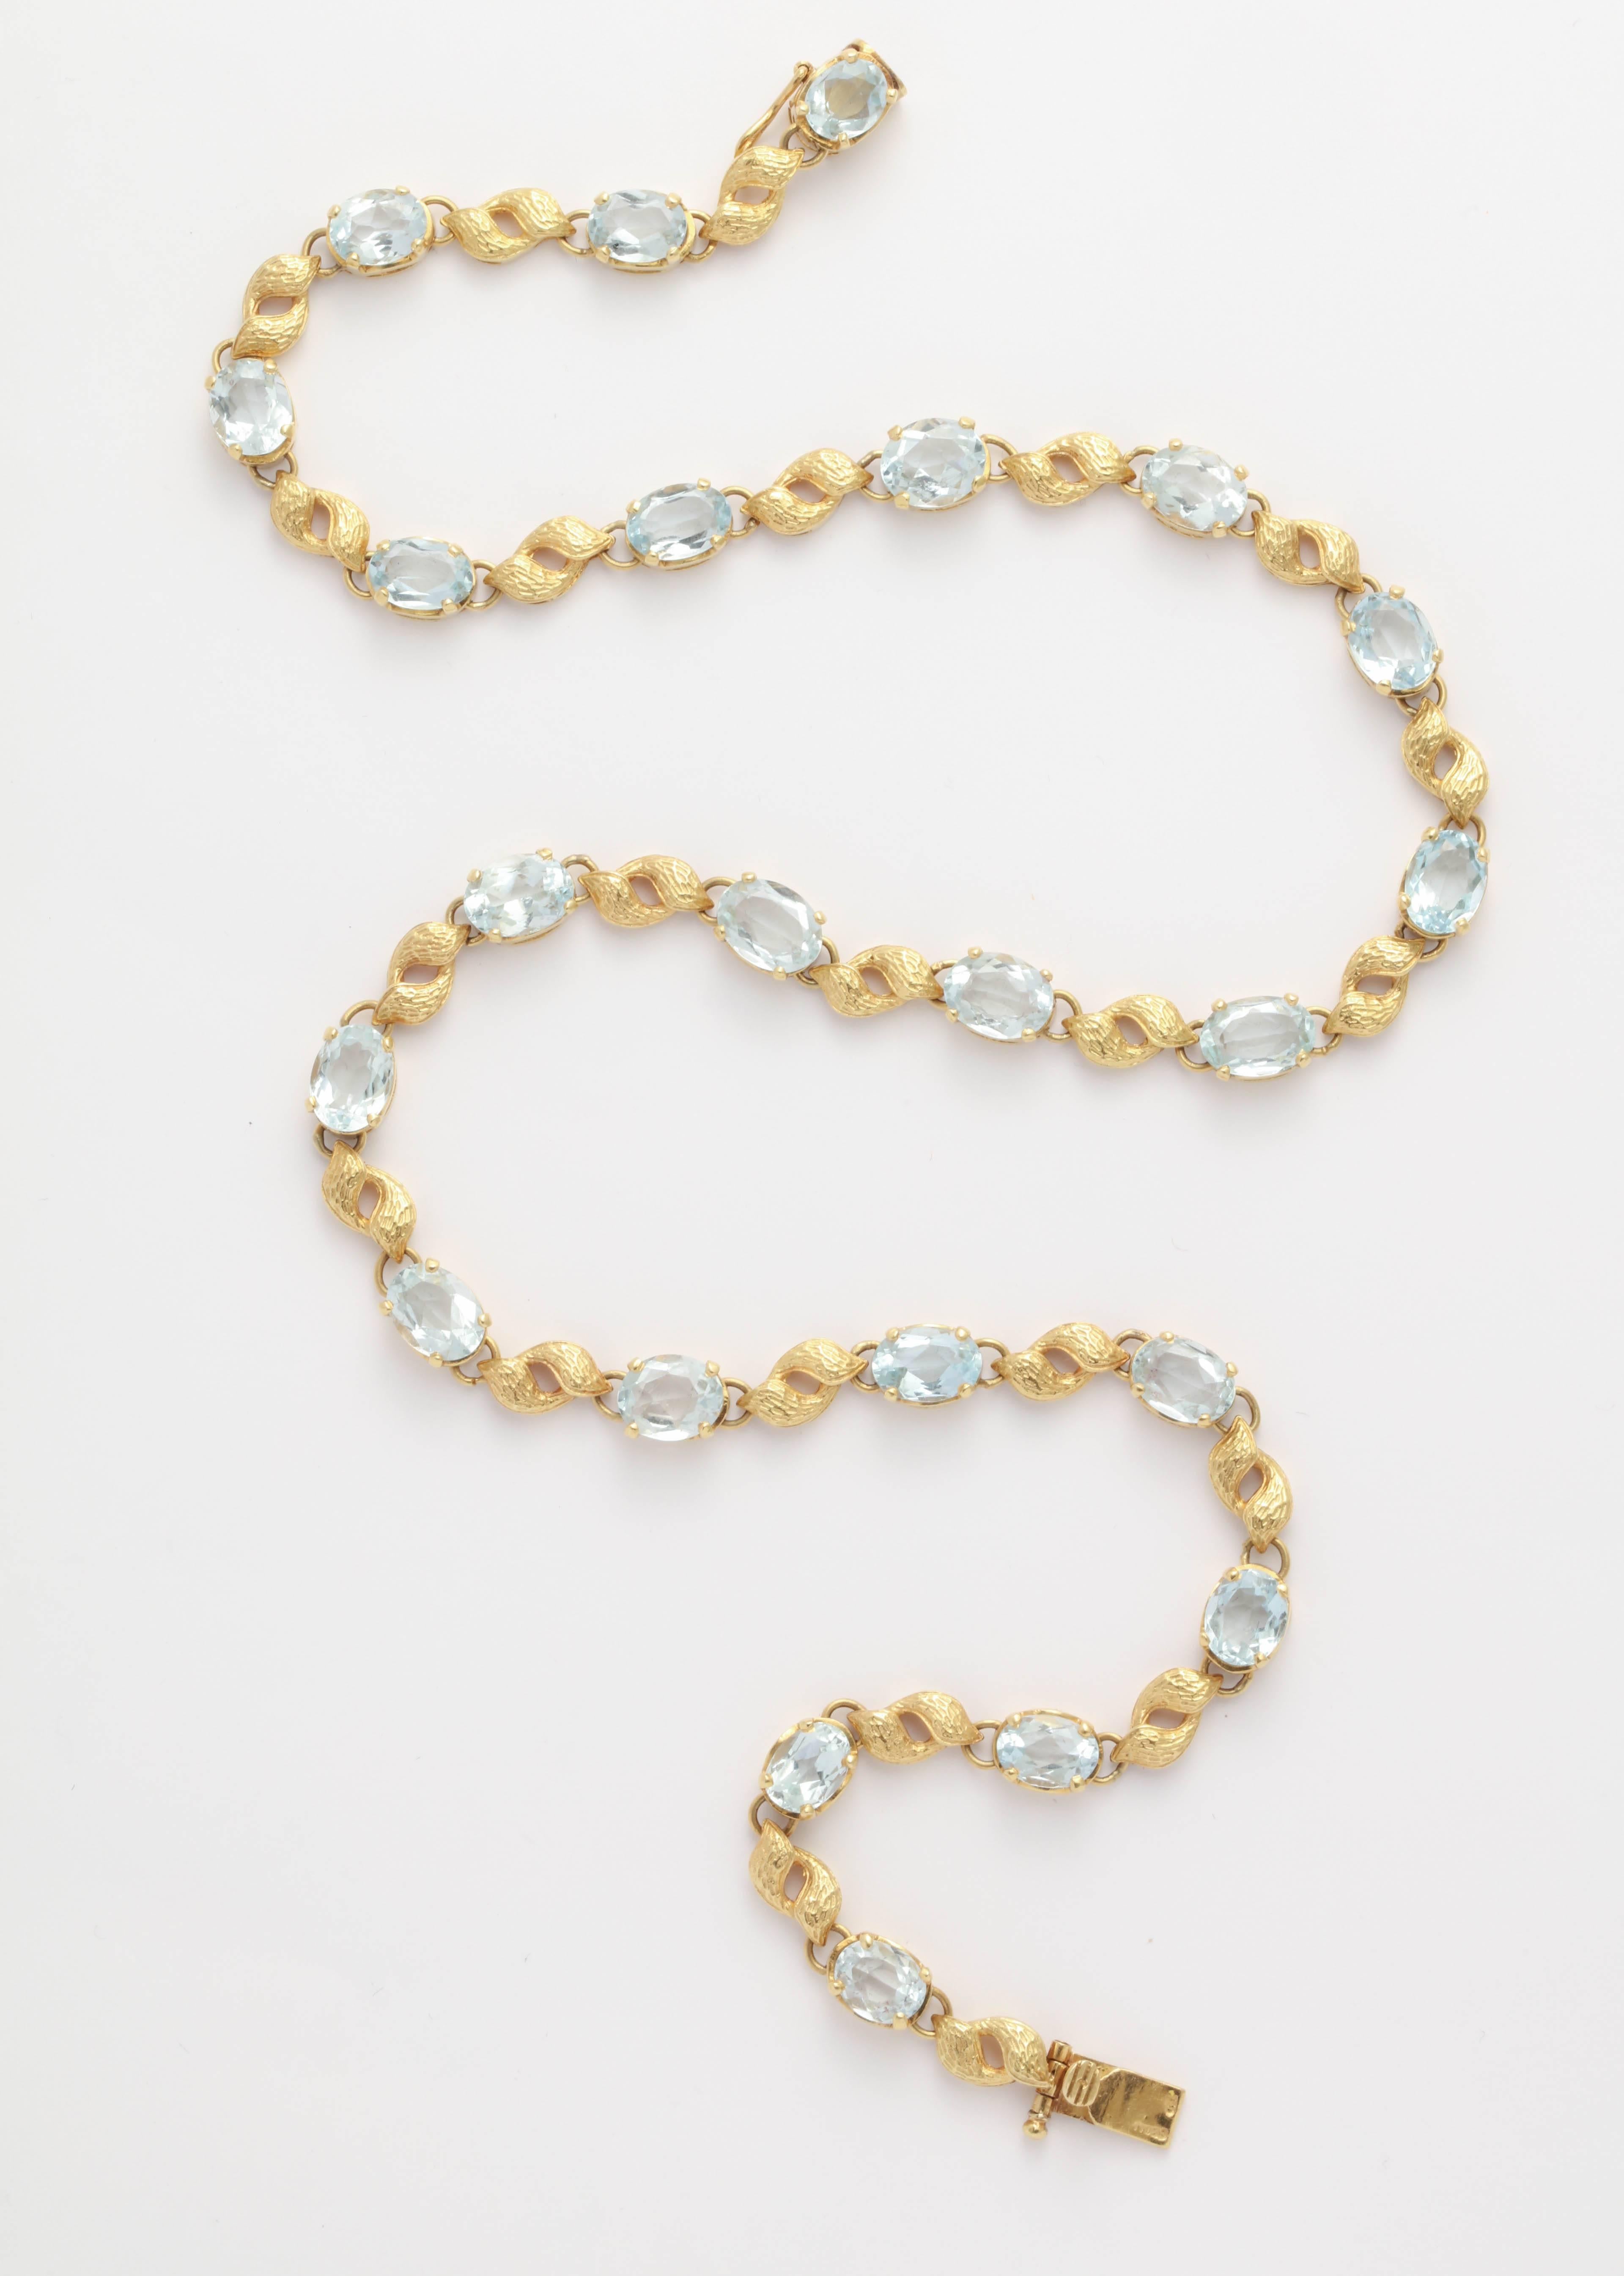 Very Graceful and delicate Necklace composed of an 18kt engraved Floral Leaf and alternating with a faceted Aquamarine.   Pale blue Aquas and Gold forming a circlet .  Marked 750.  Total weight of Stones - Approximately 25 Carats.
 